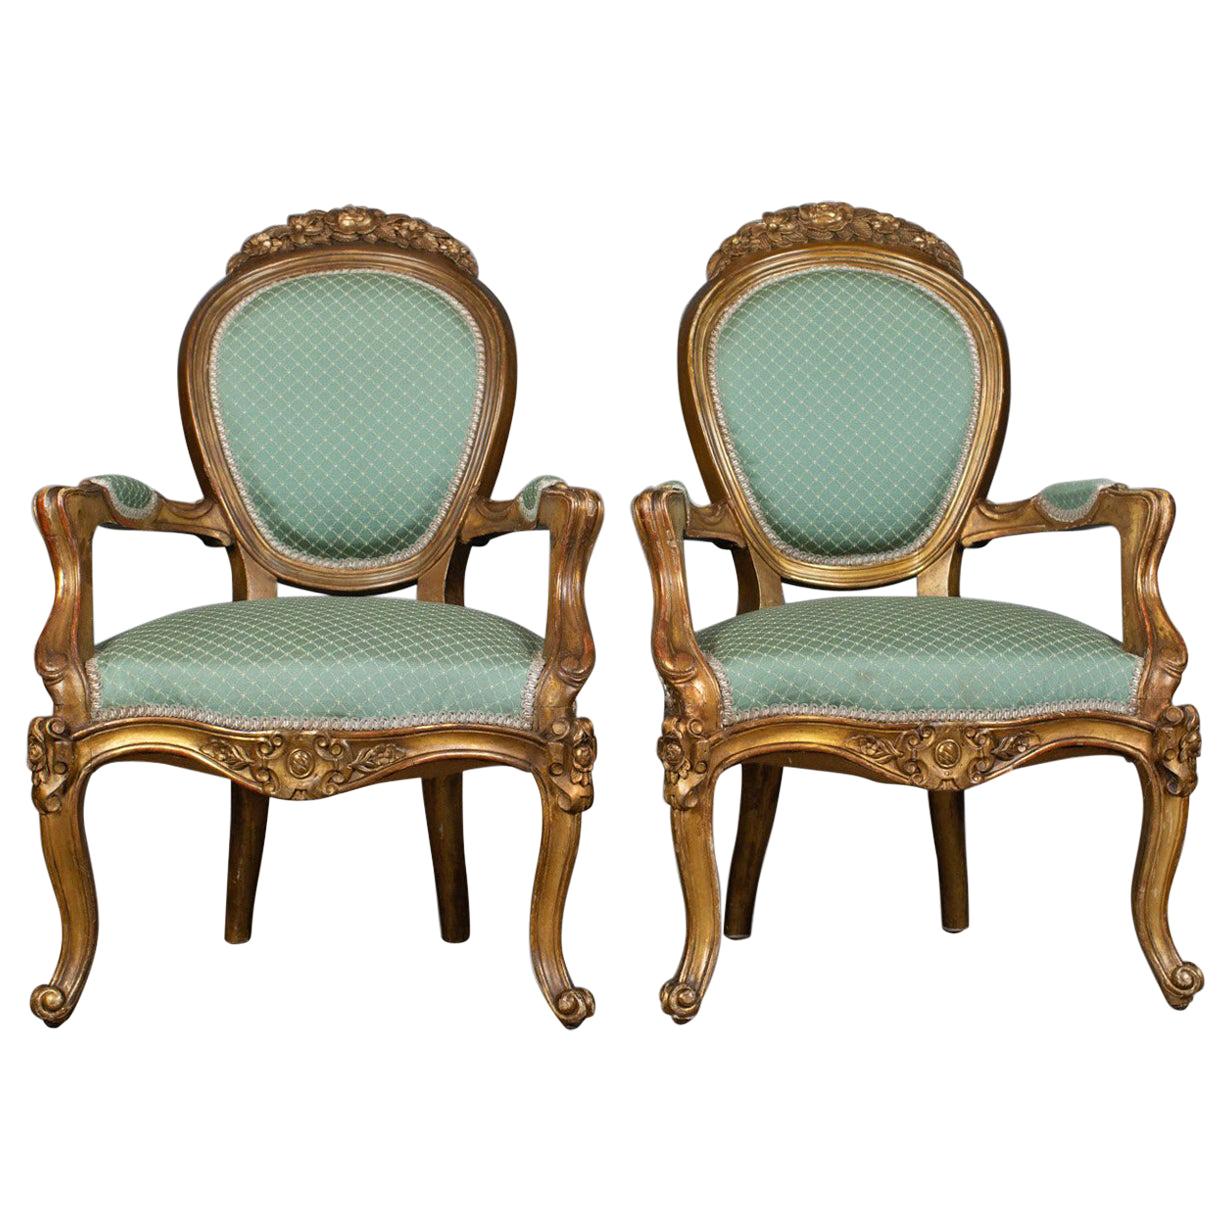 Pair of Antique, Louis XV Revival, Open Armchairs, French, Giltwood, circa 1900